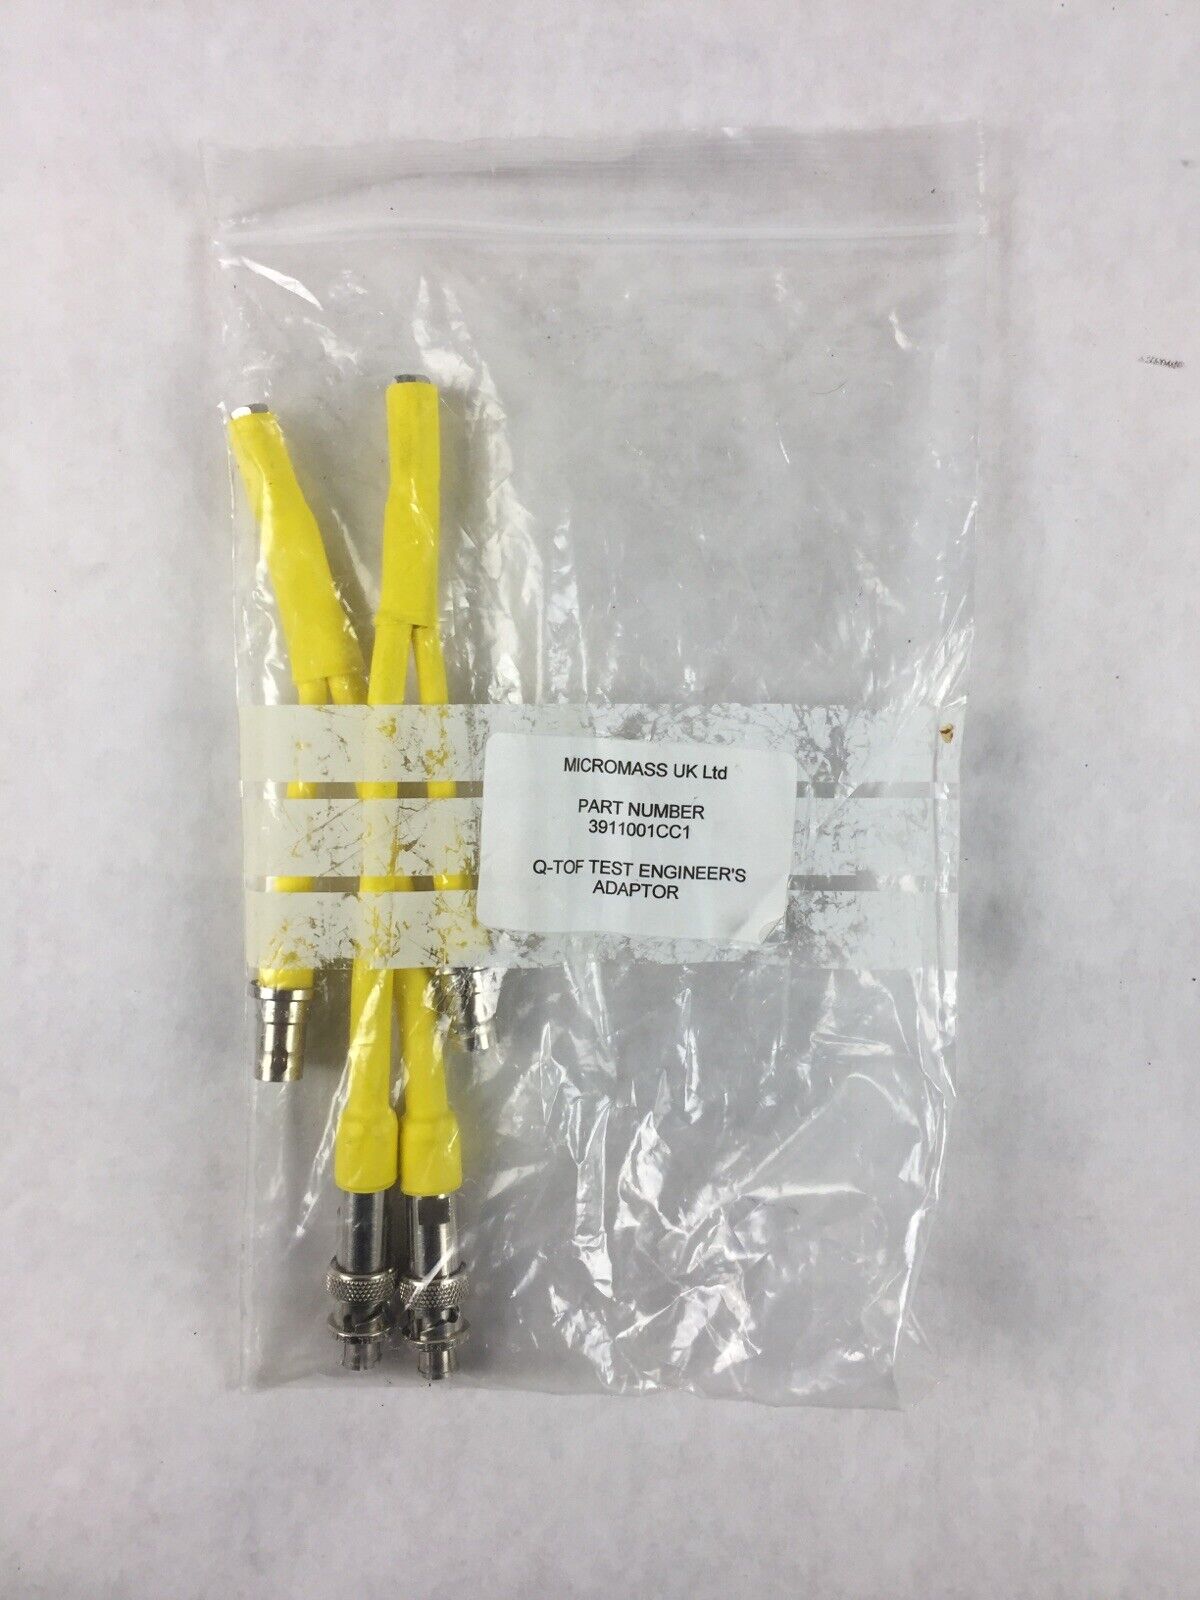 LOT OF 2 WATERS MICROMASS Q-TOF TEST ENGINEER'S ADAPTOR 3911001CC1